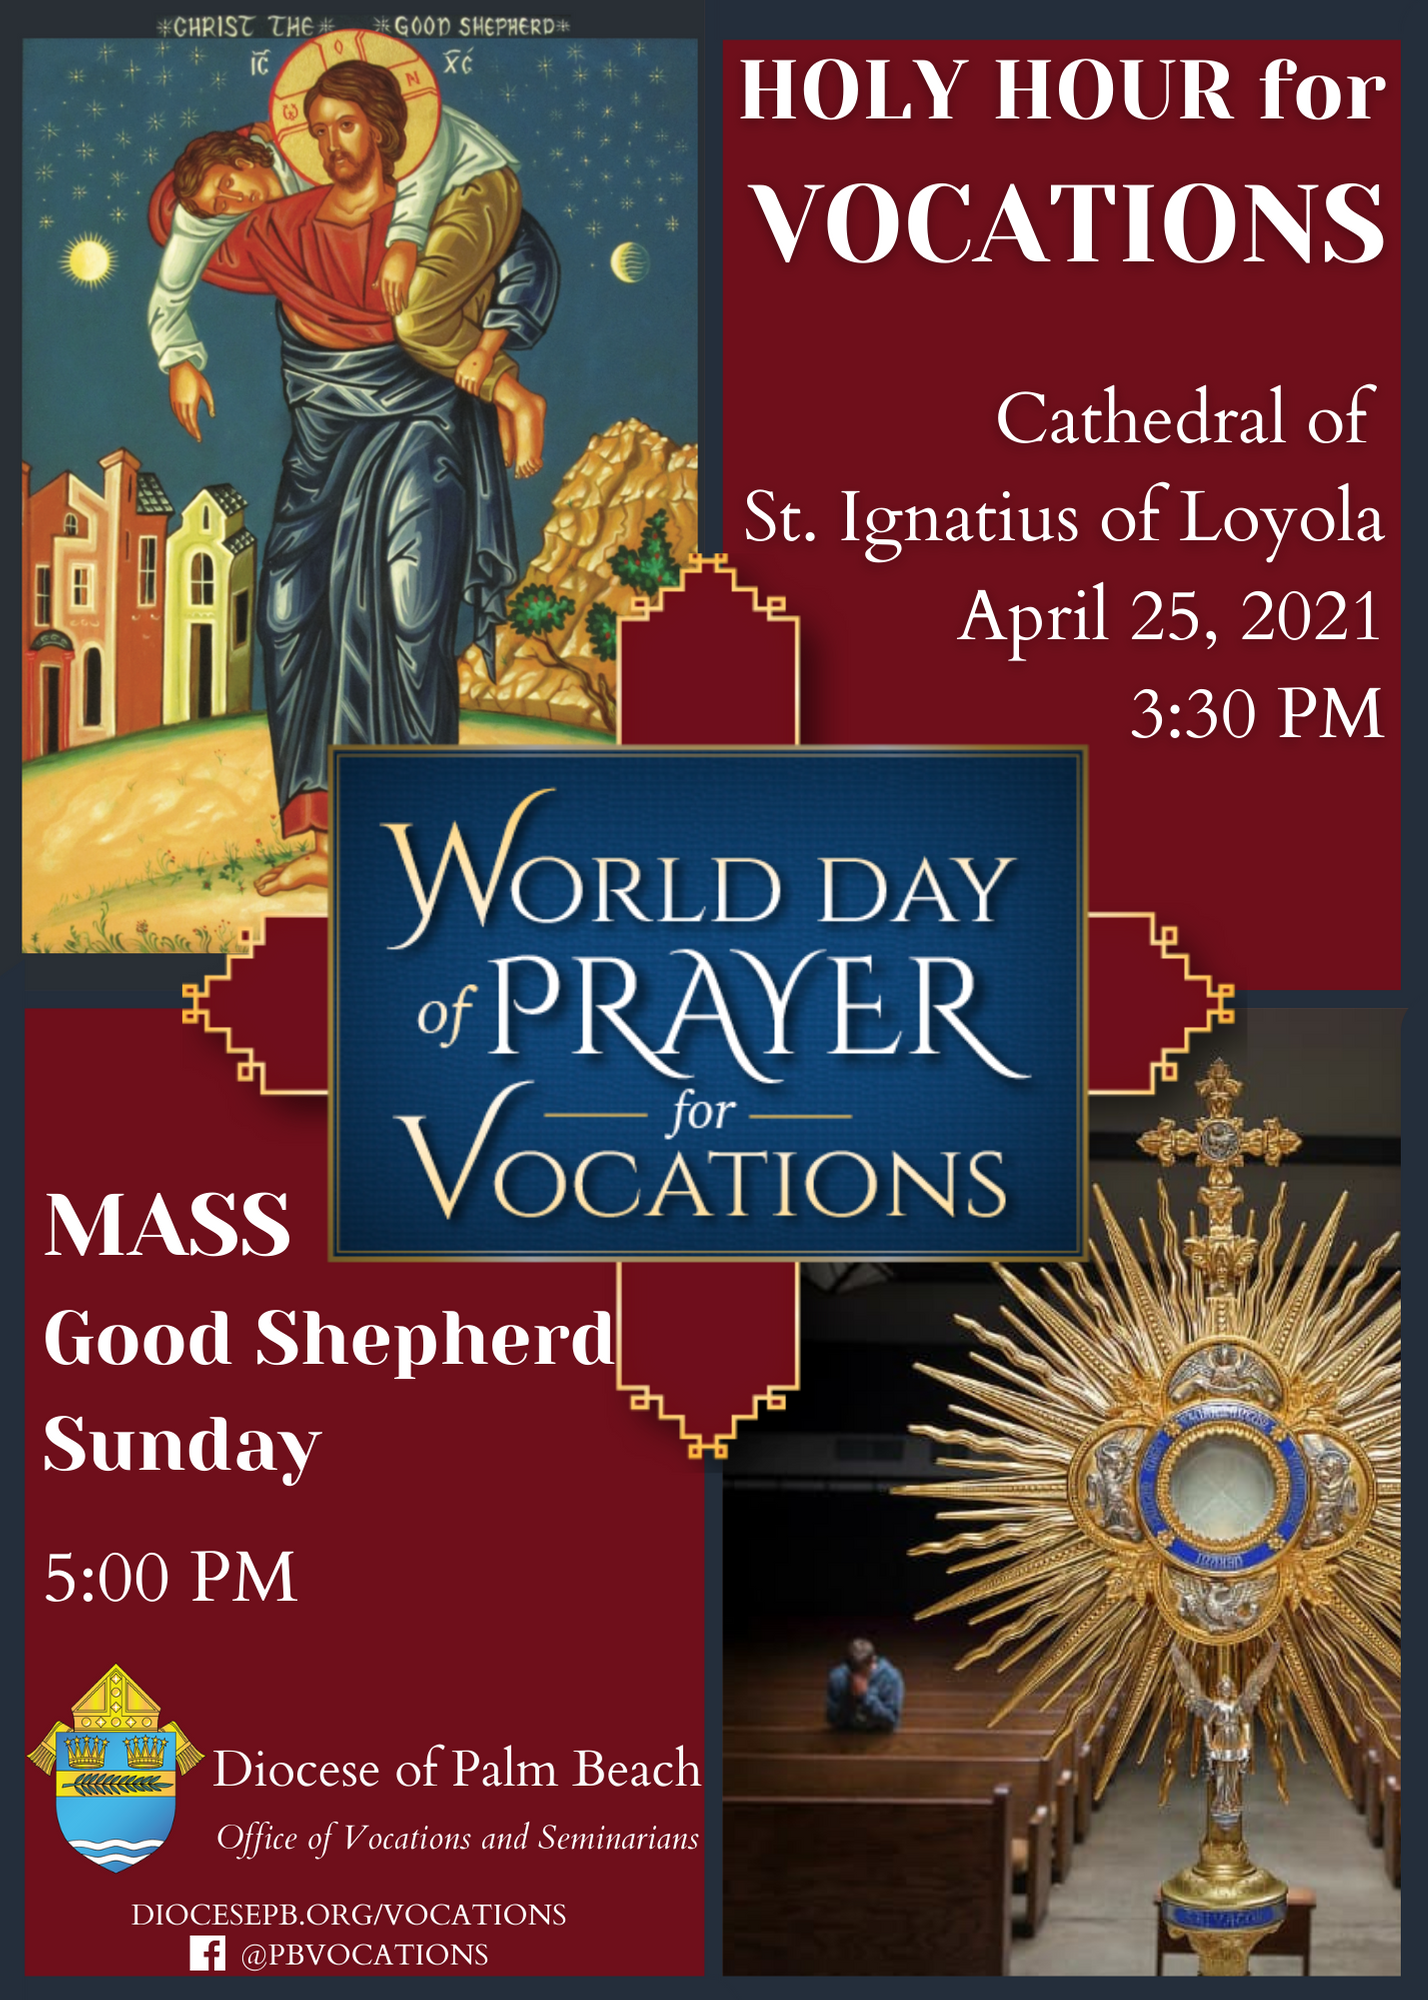 World Day of Prayer for Vocations